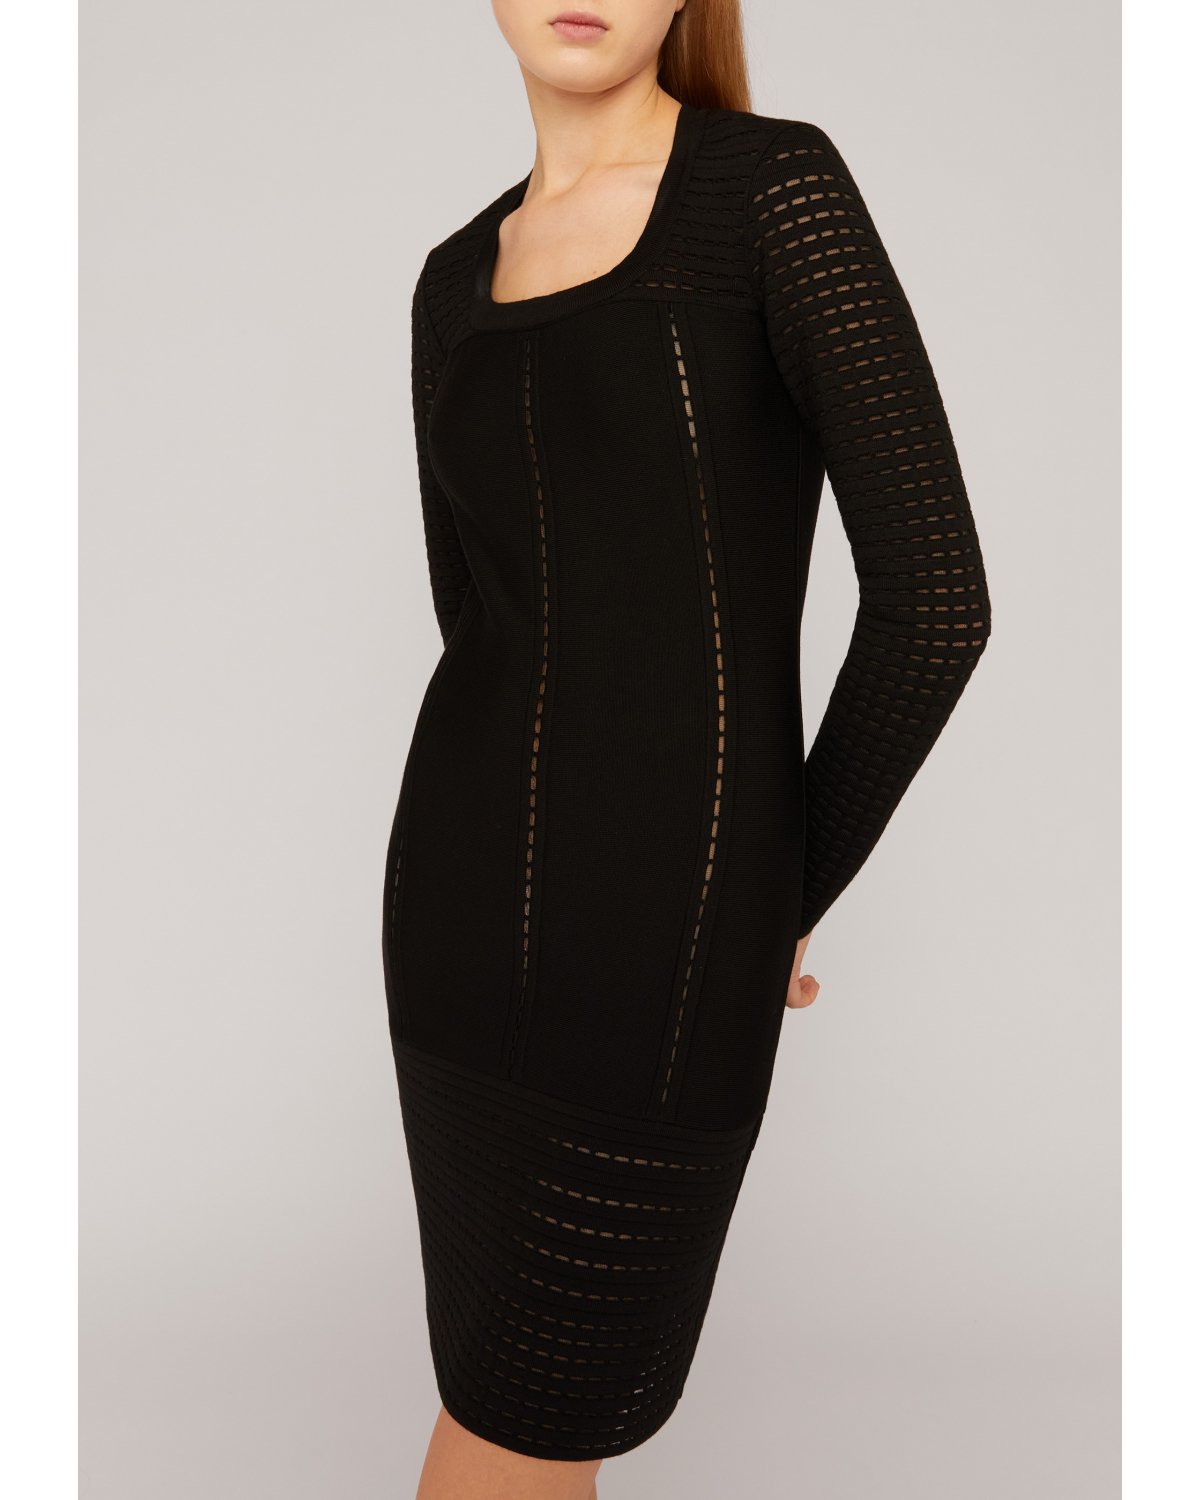 Sheath dress with iconic embroideries | 73_74, Iconic Capsule Collection, Cold weather wear | Genny